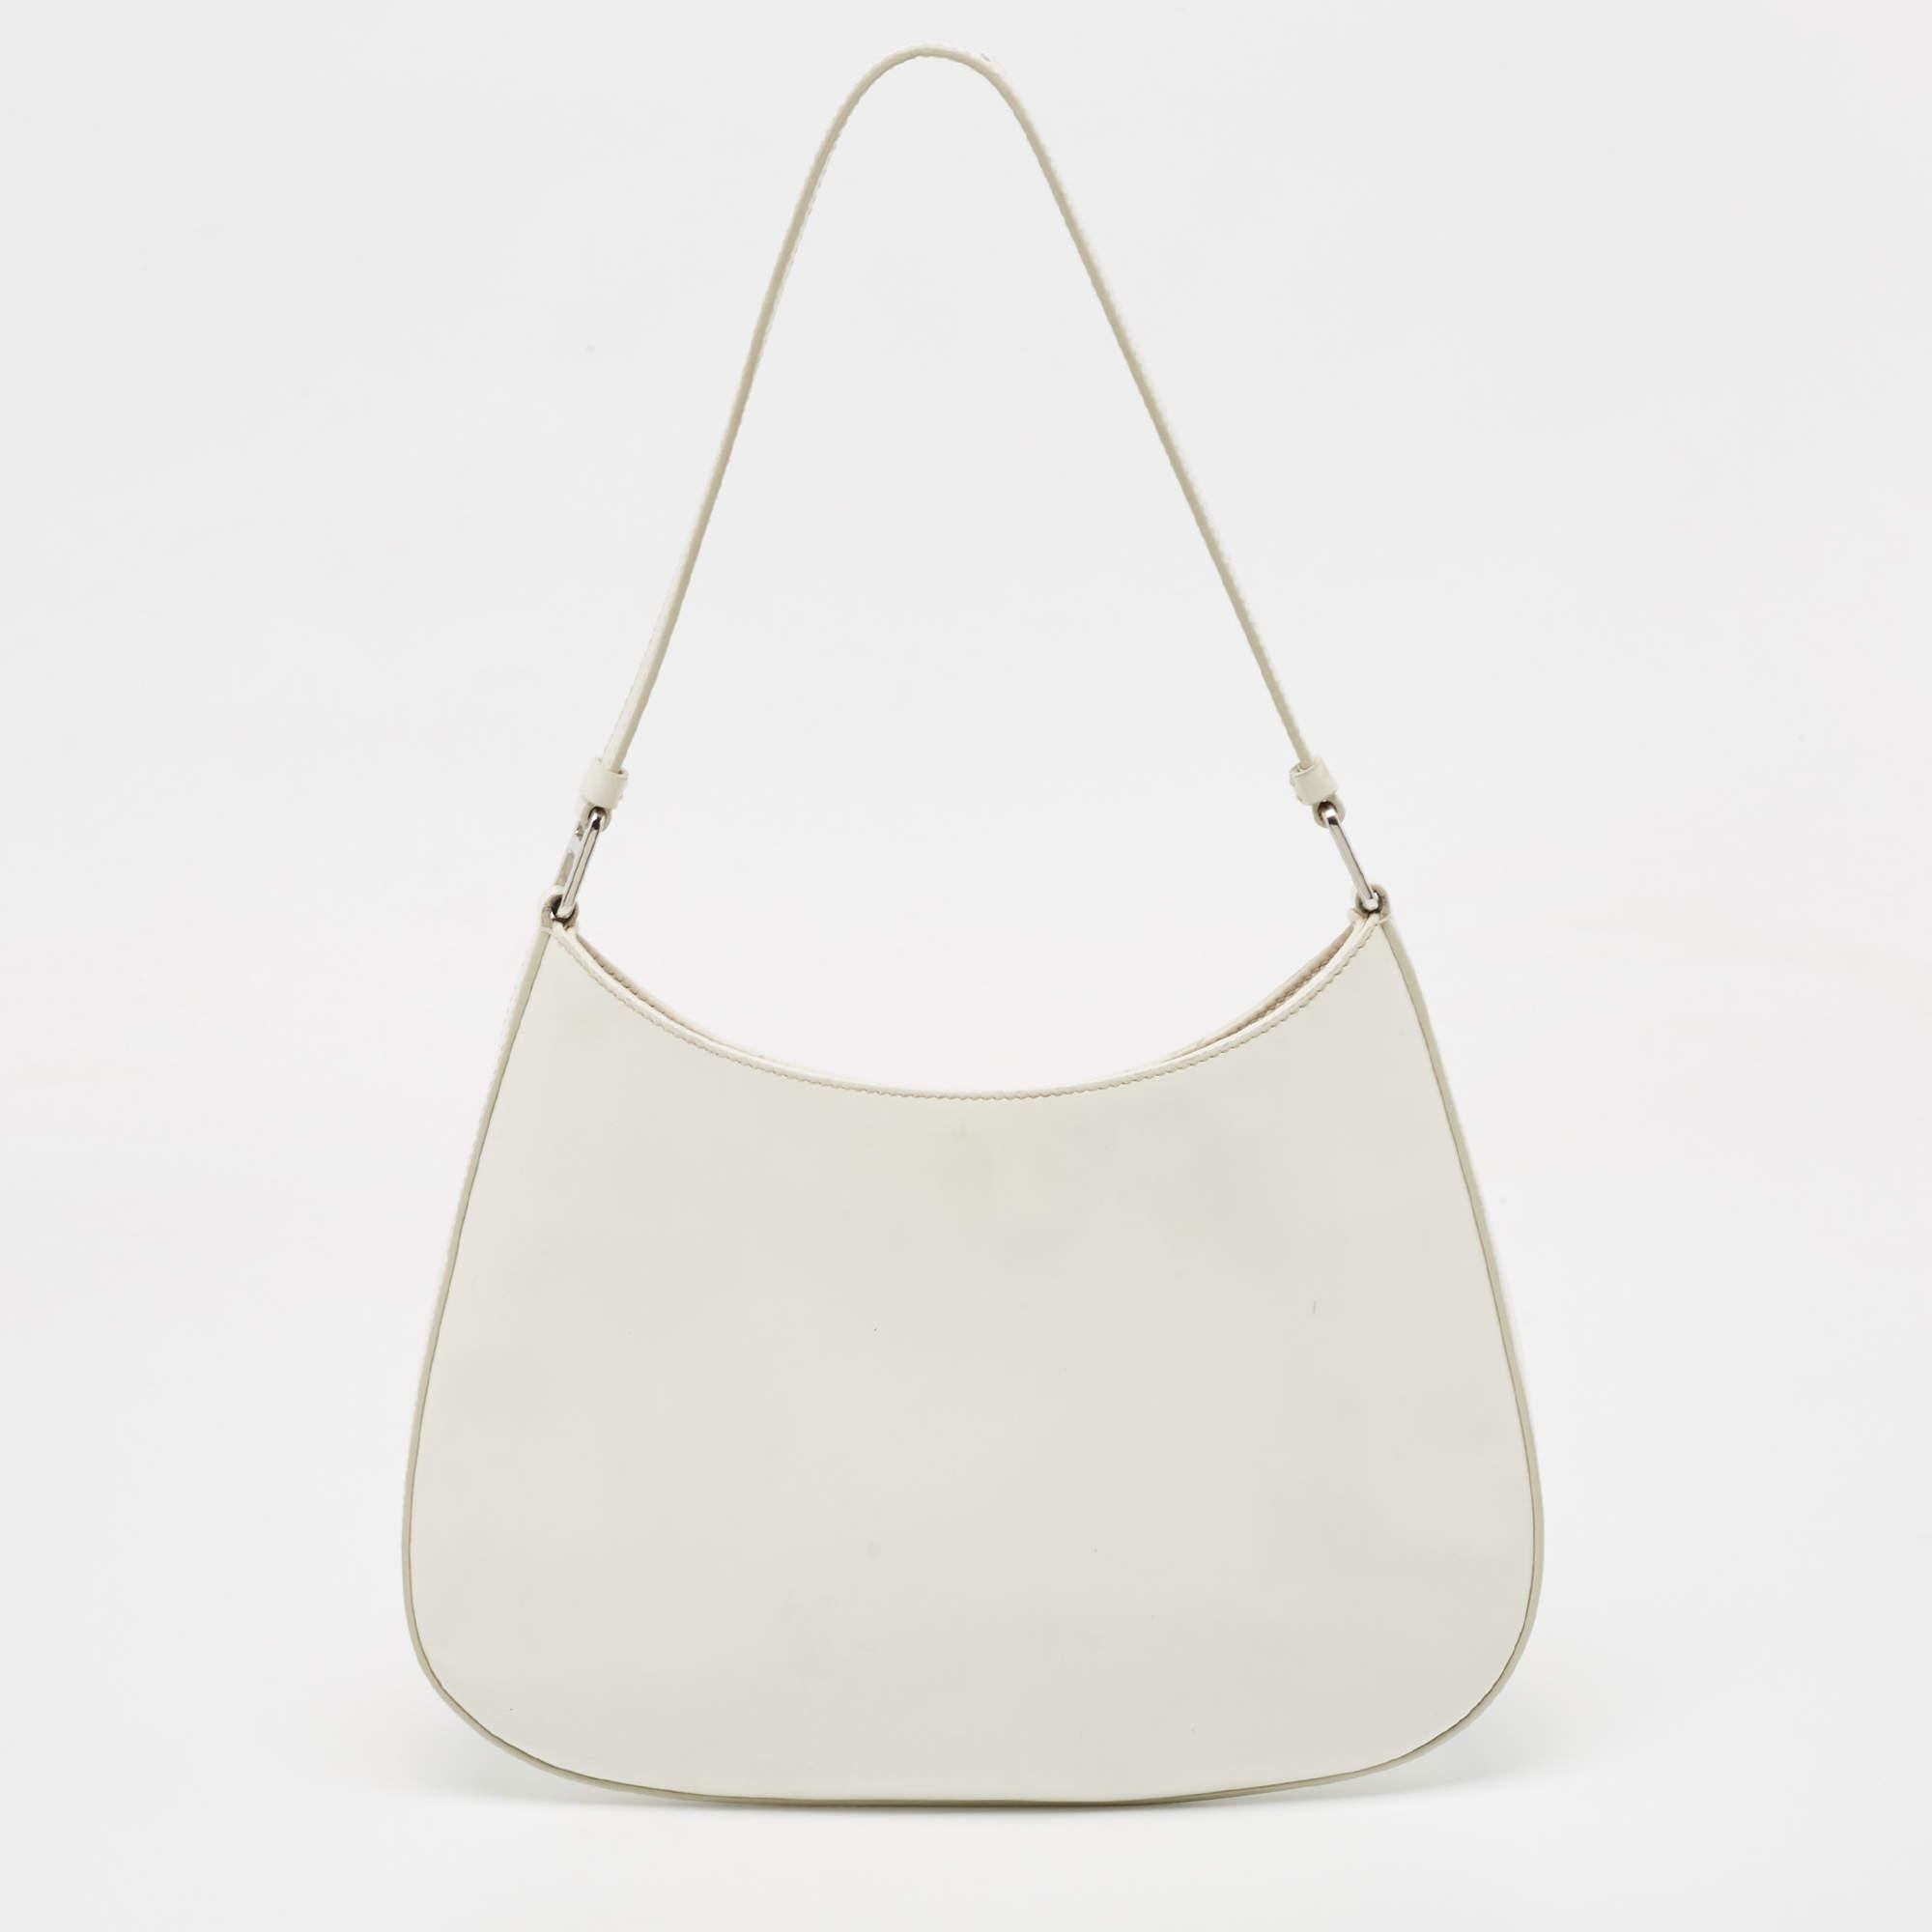 This Prada Cleo bag showcases the label's classy design attributes. It is made from leather in a white hue and added with the brand logo and a top handle.

